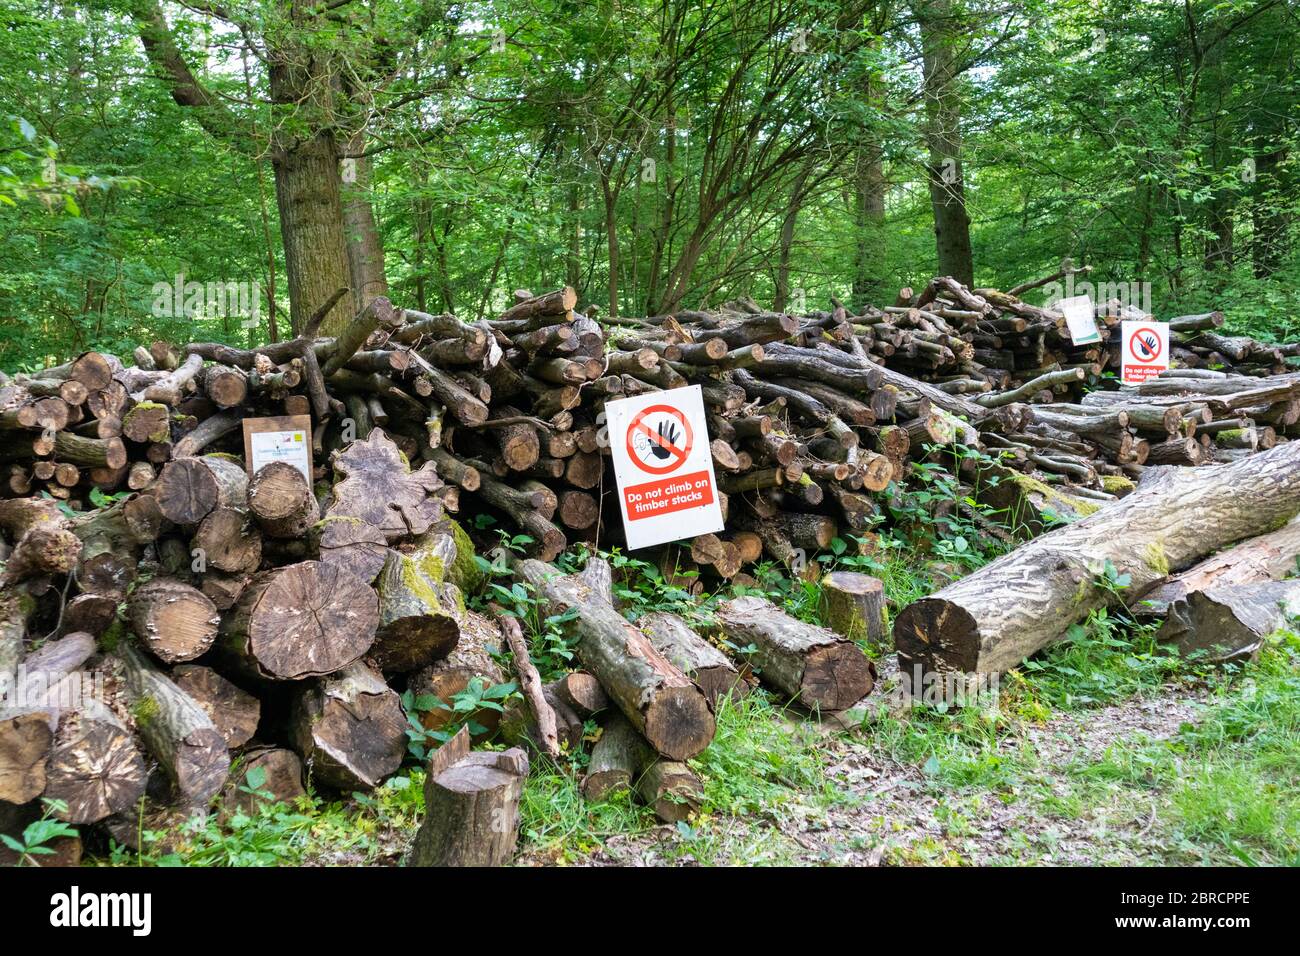 Do not climb on timber stacks sign, forest management, coppicing, log stacks and firewood, hamstreet national nature reserve, kent, uk Stock Photo